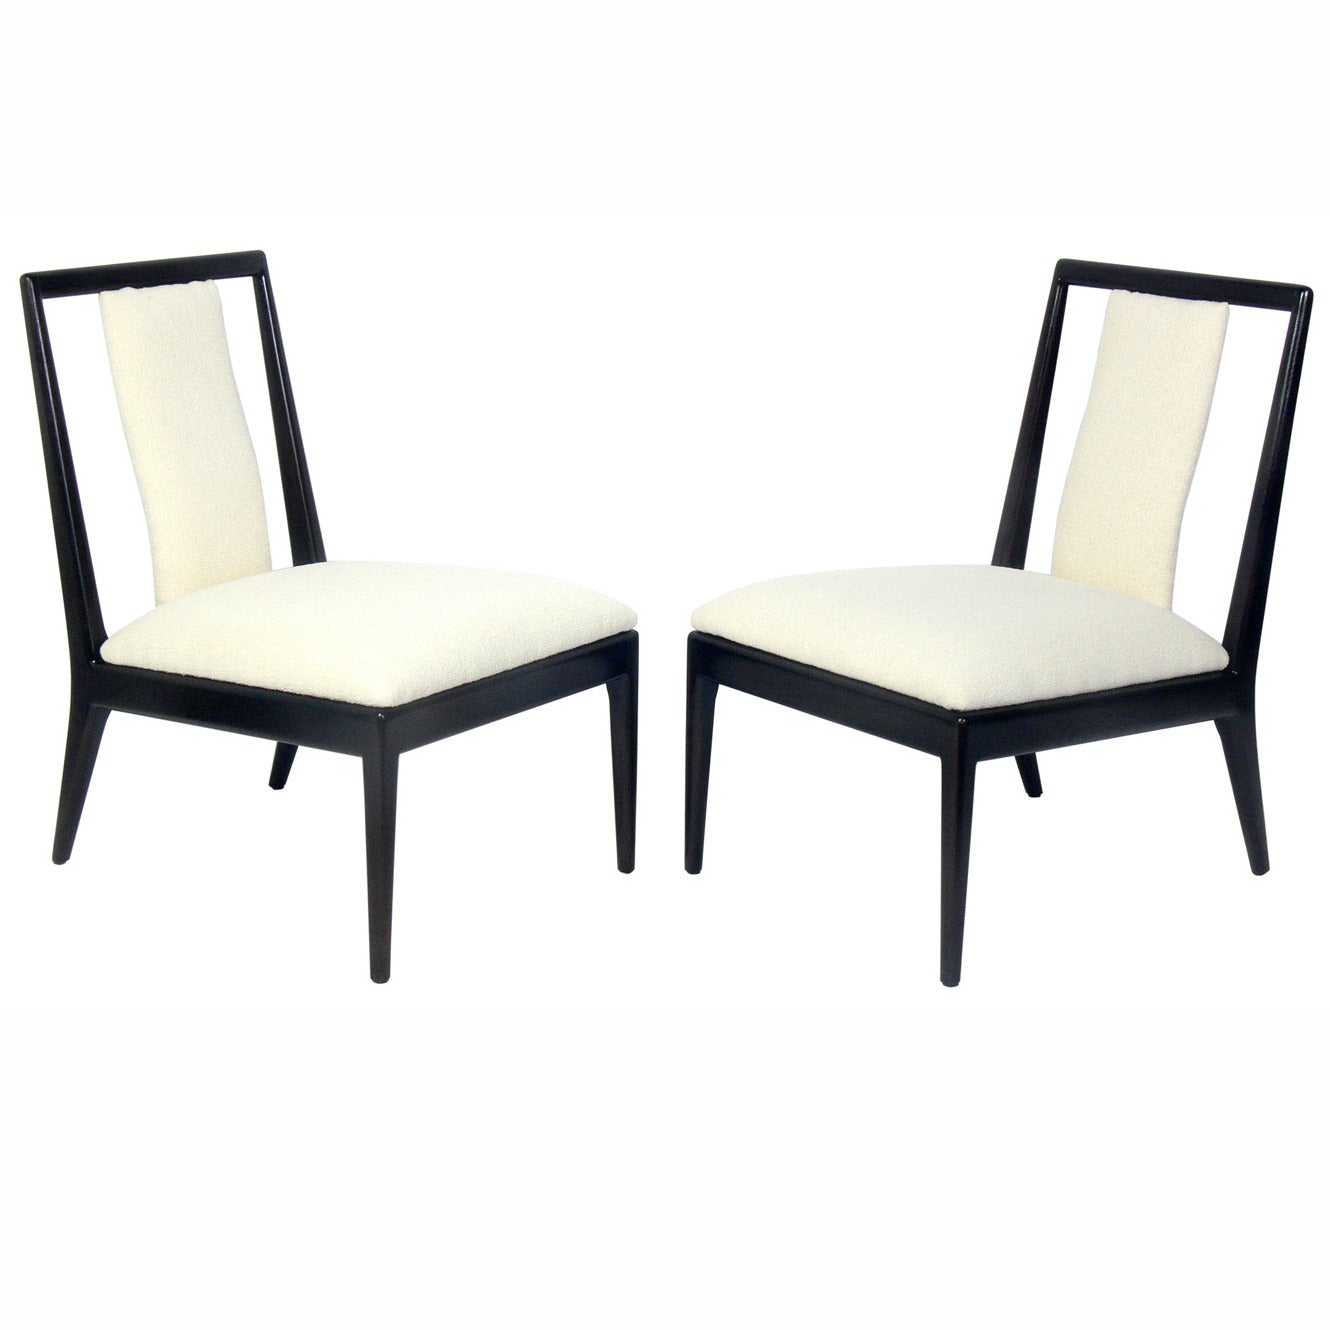 Pair of Petite Modern Slipper Chairs For Sale